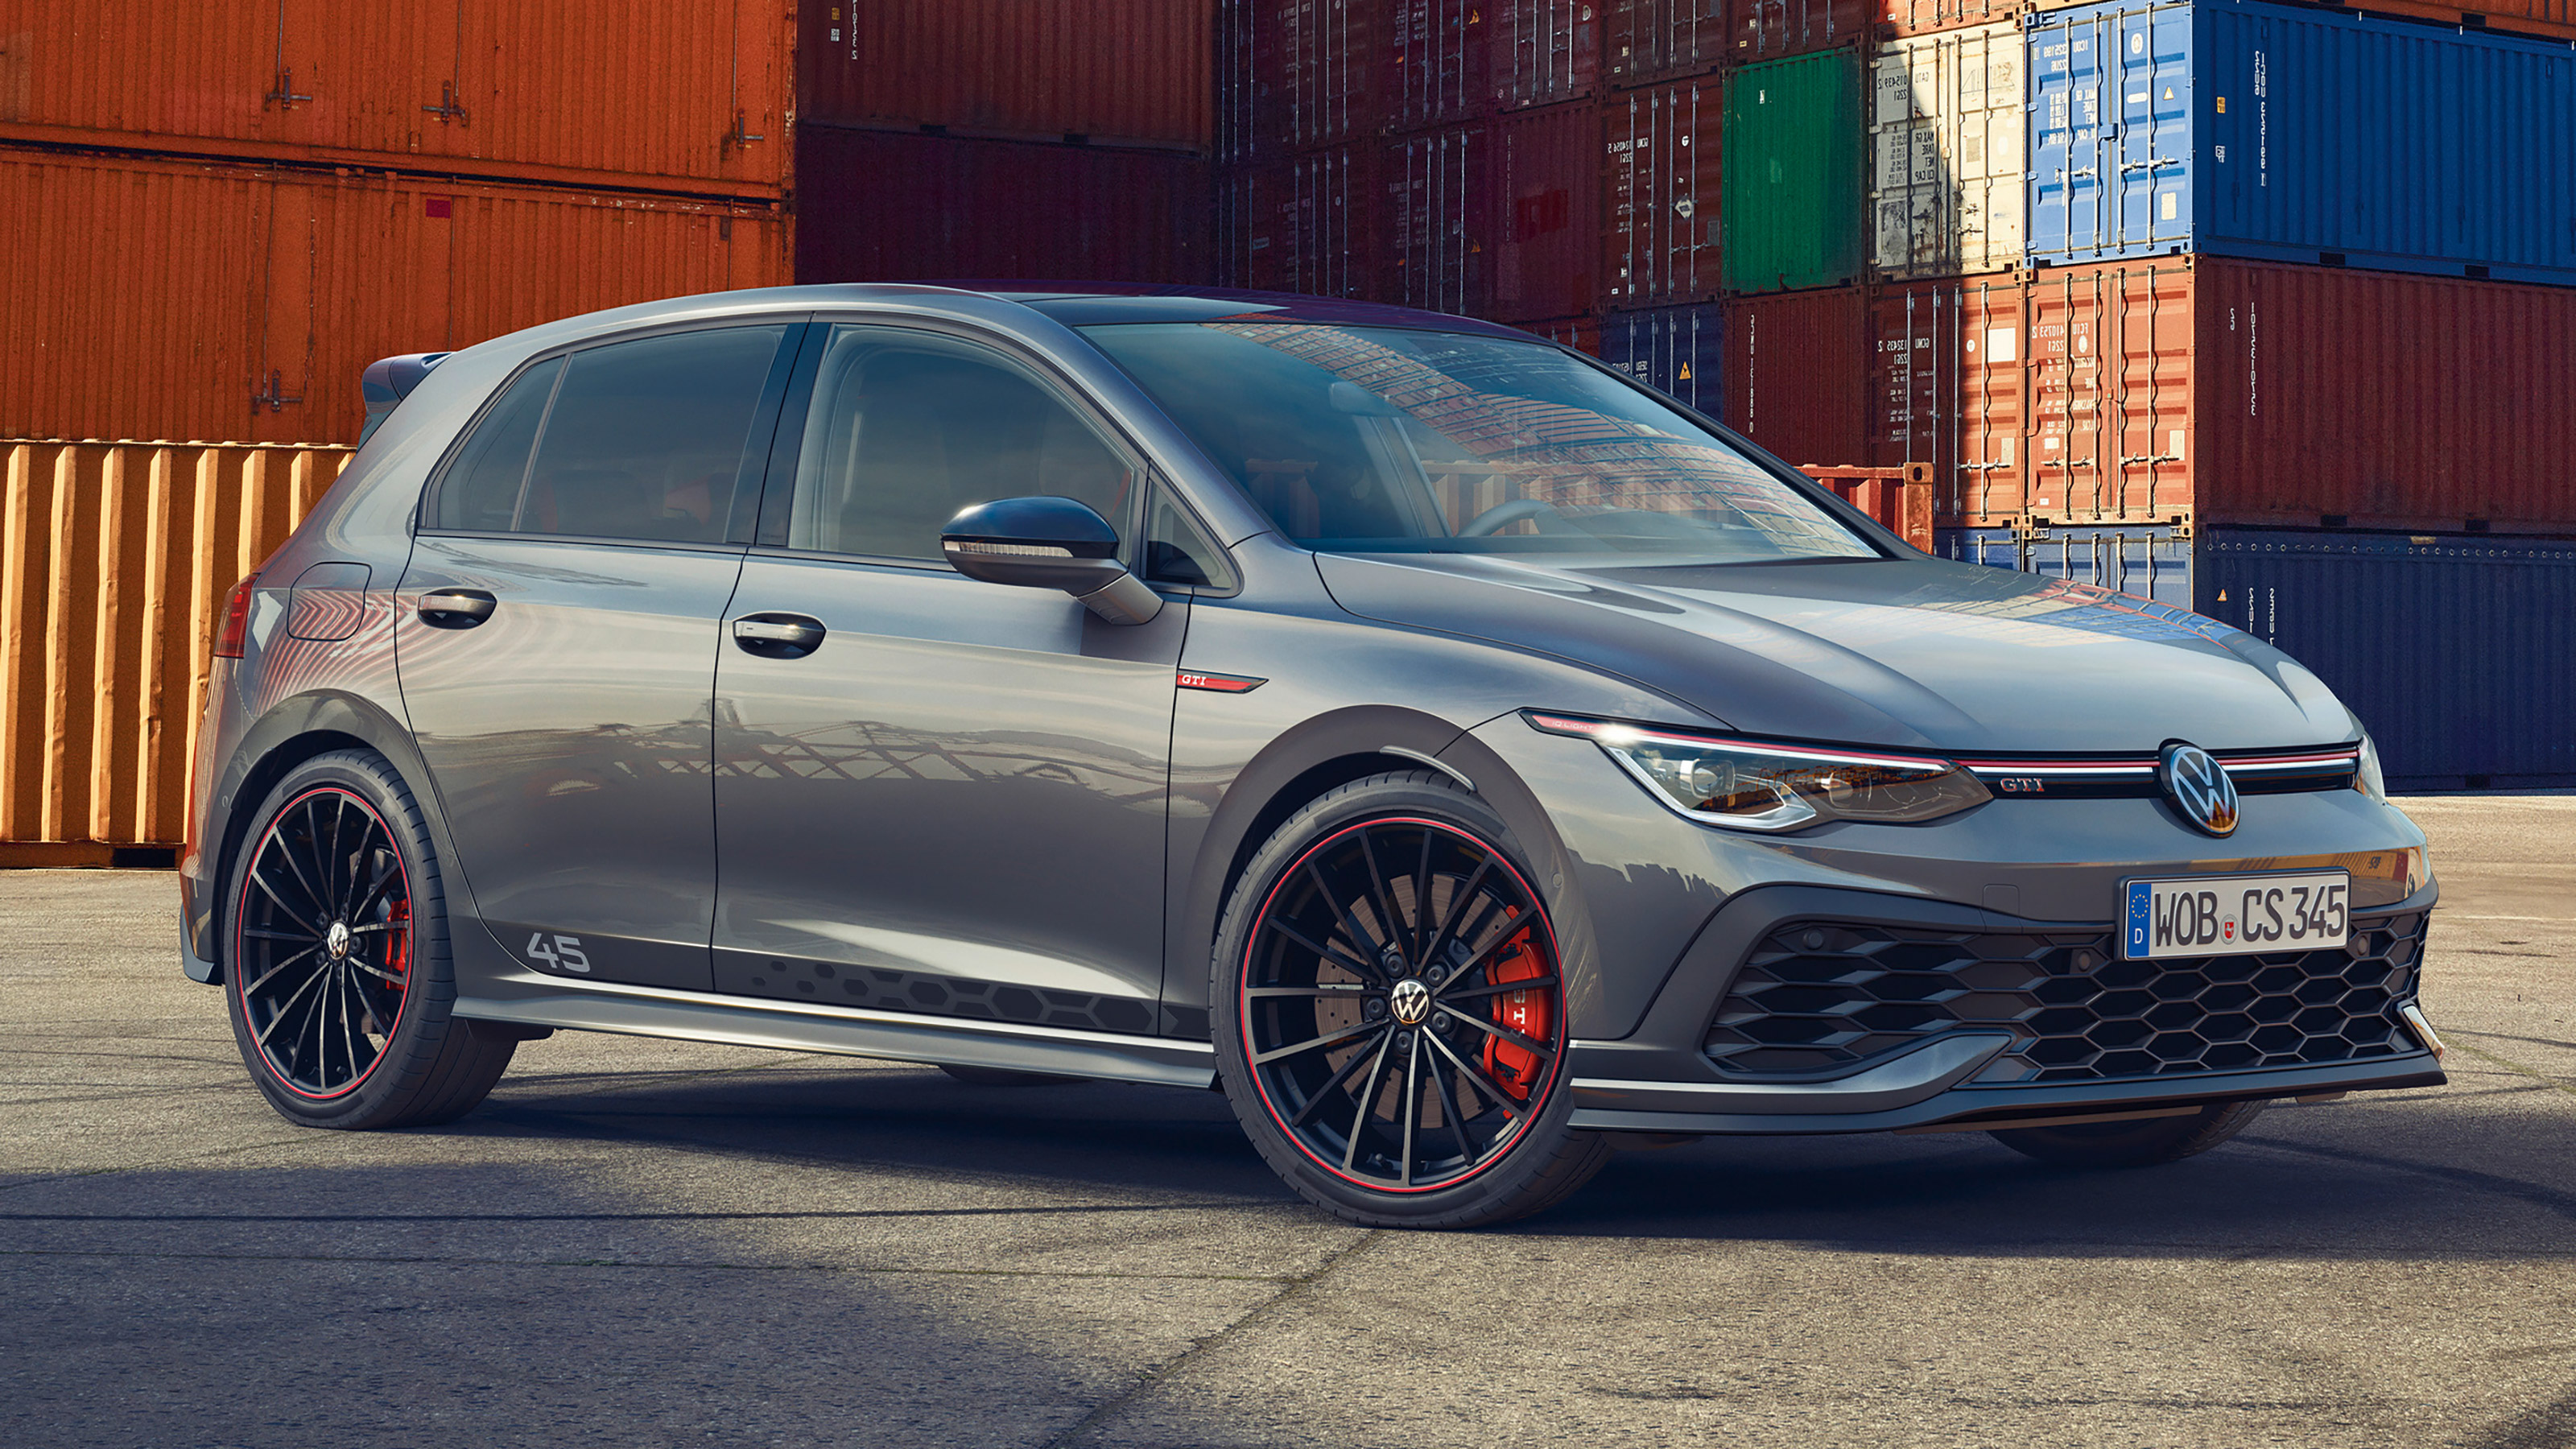 Volkswagen Golf GTI Clubsport 45 priced from £39,980 – more than a